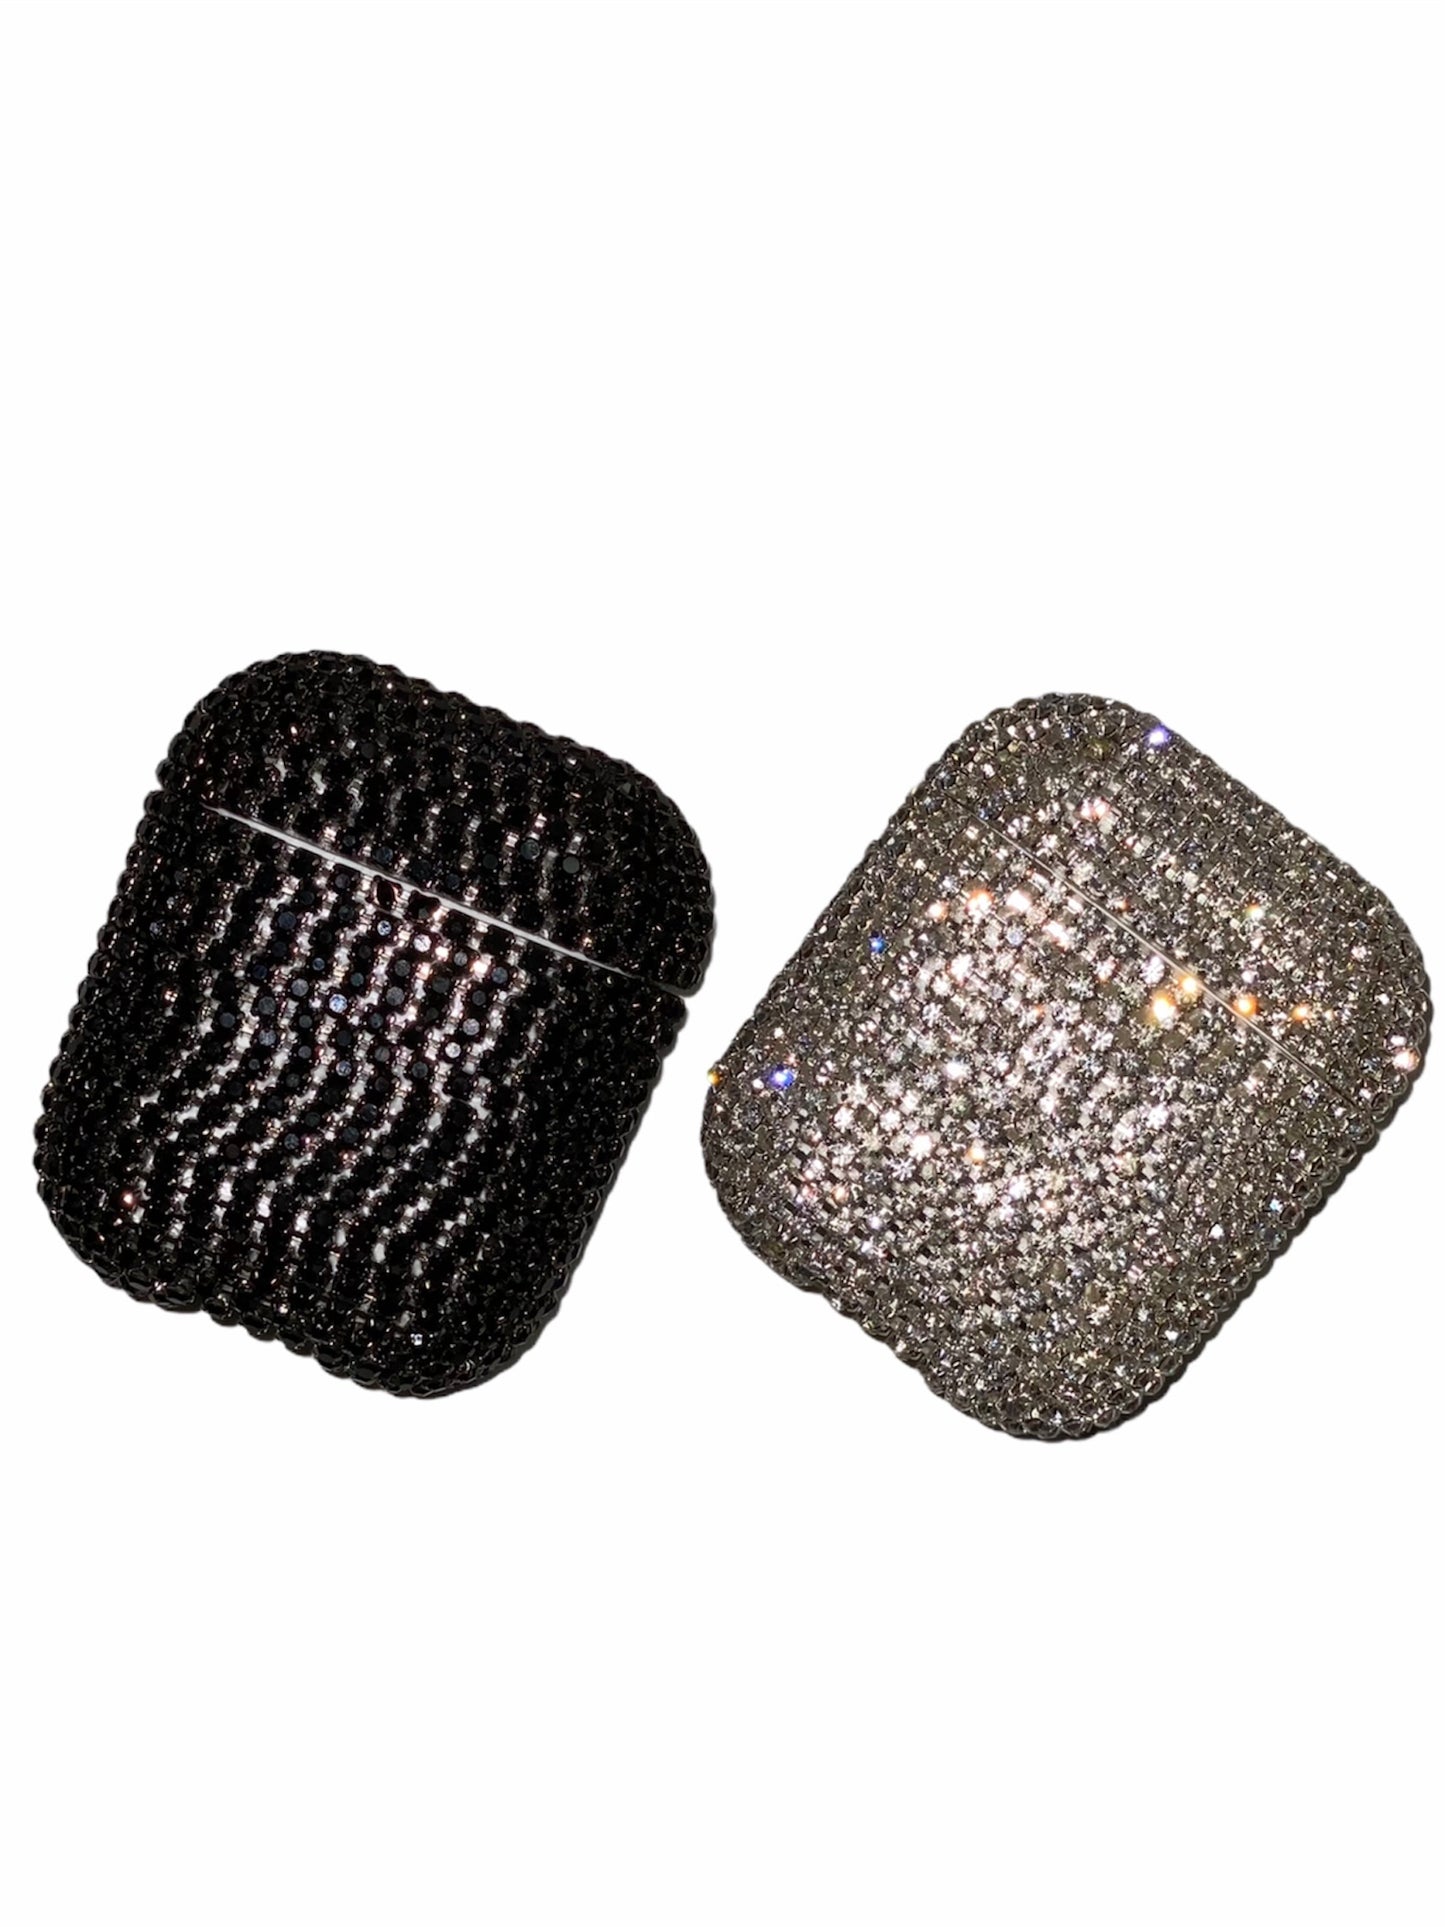 BLING AIRPODS CASES - 1ST GEN + PRO